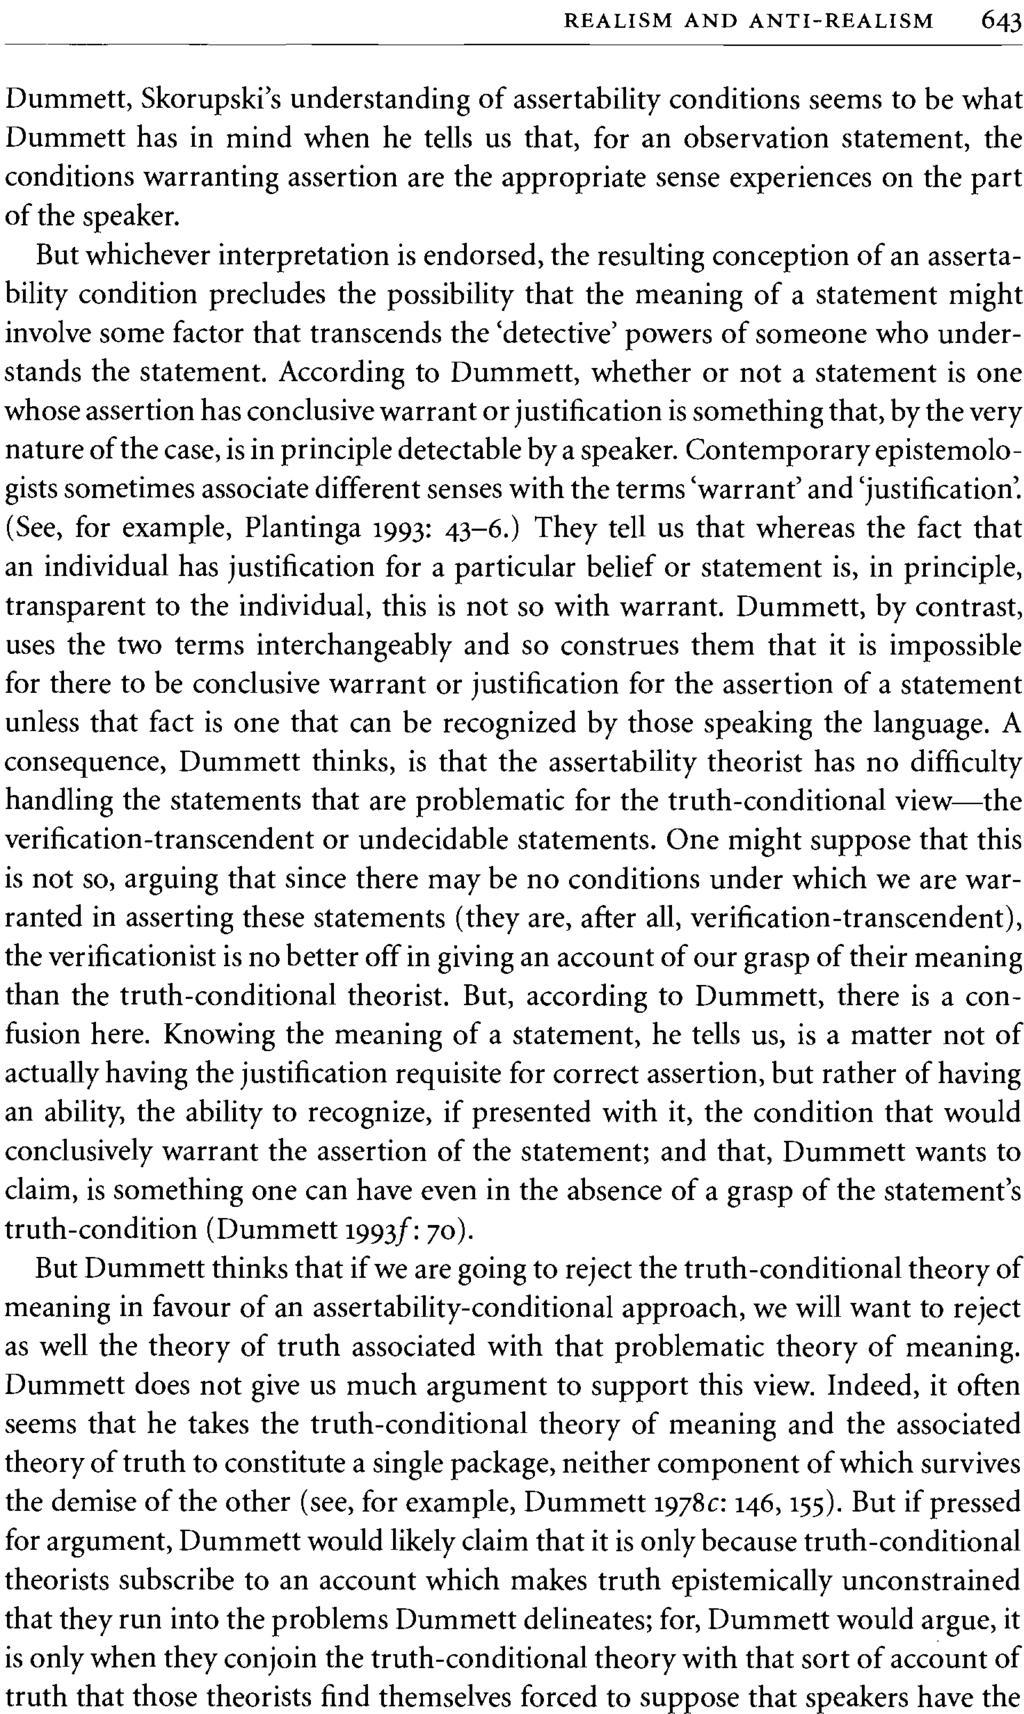 REALISM AND ANTI-REALISM 643 Dummett, Skorupski's understanding of assertability conditions seems to be what Dummett has in mind when he tells us that, for an observation statement, the conditions